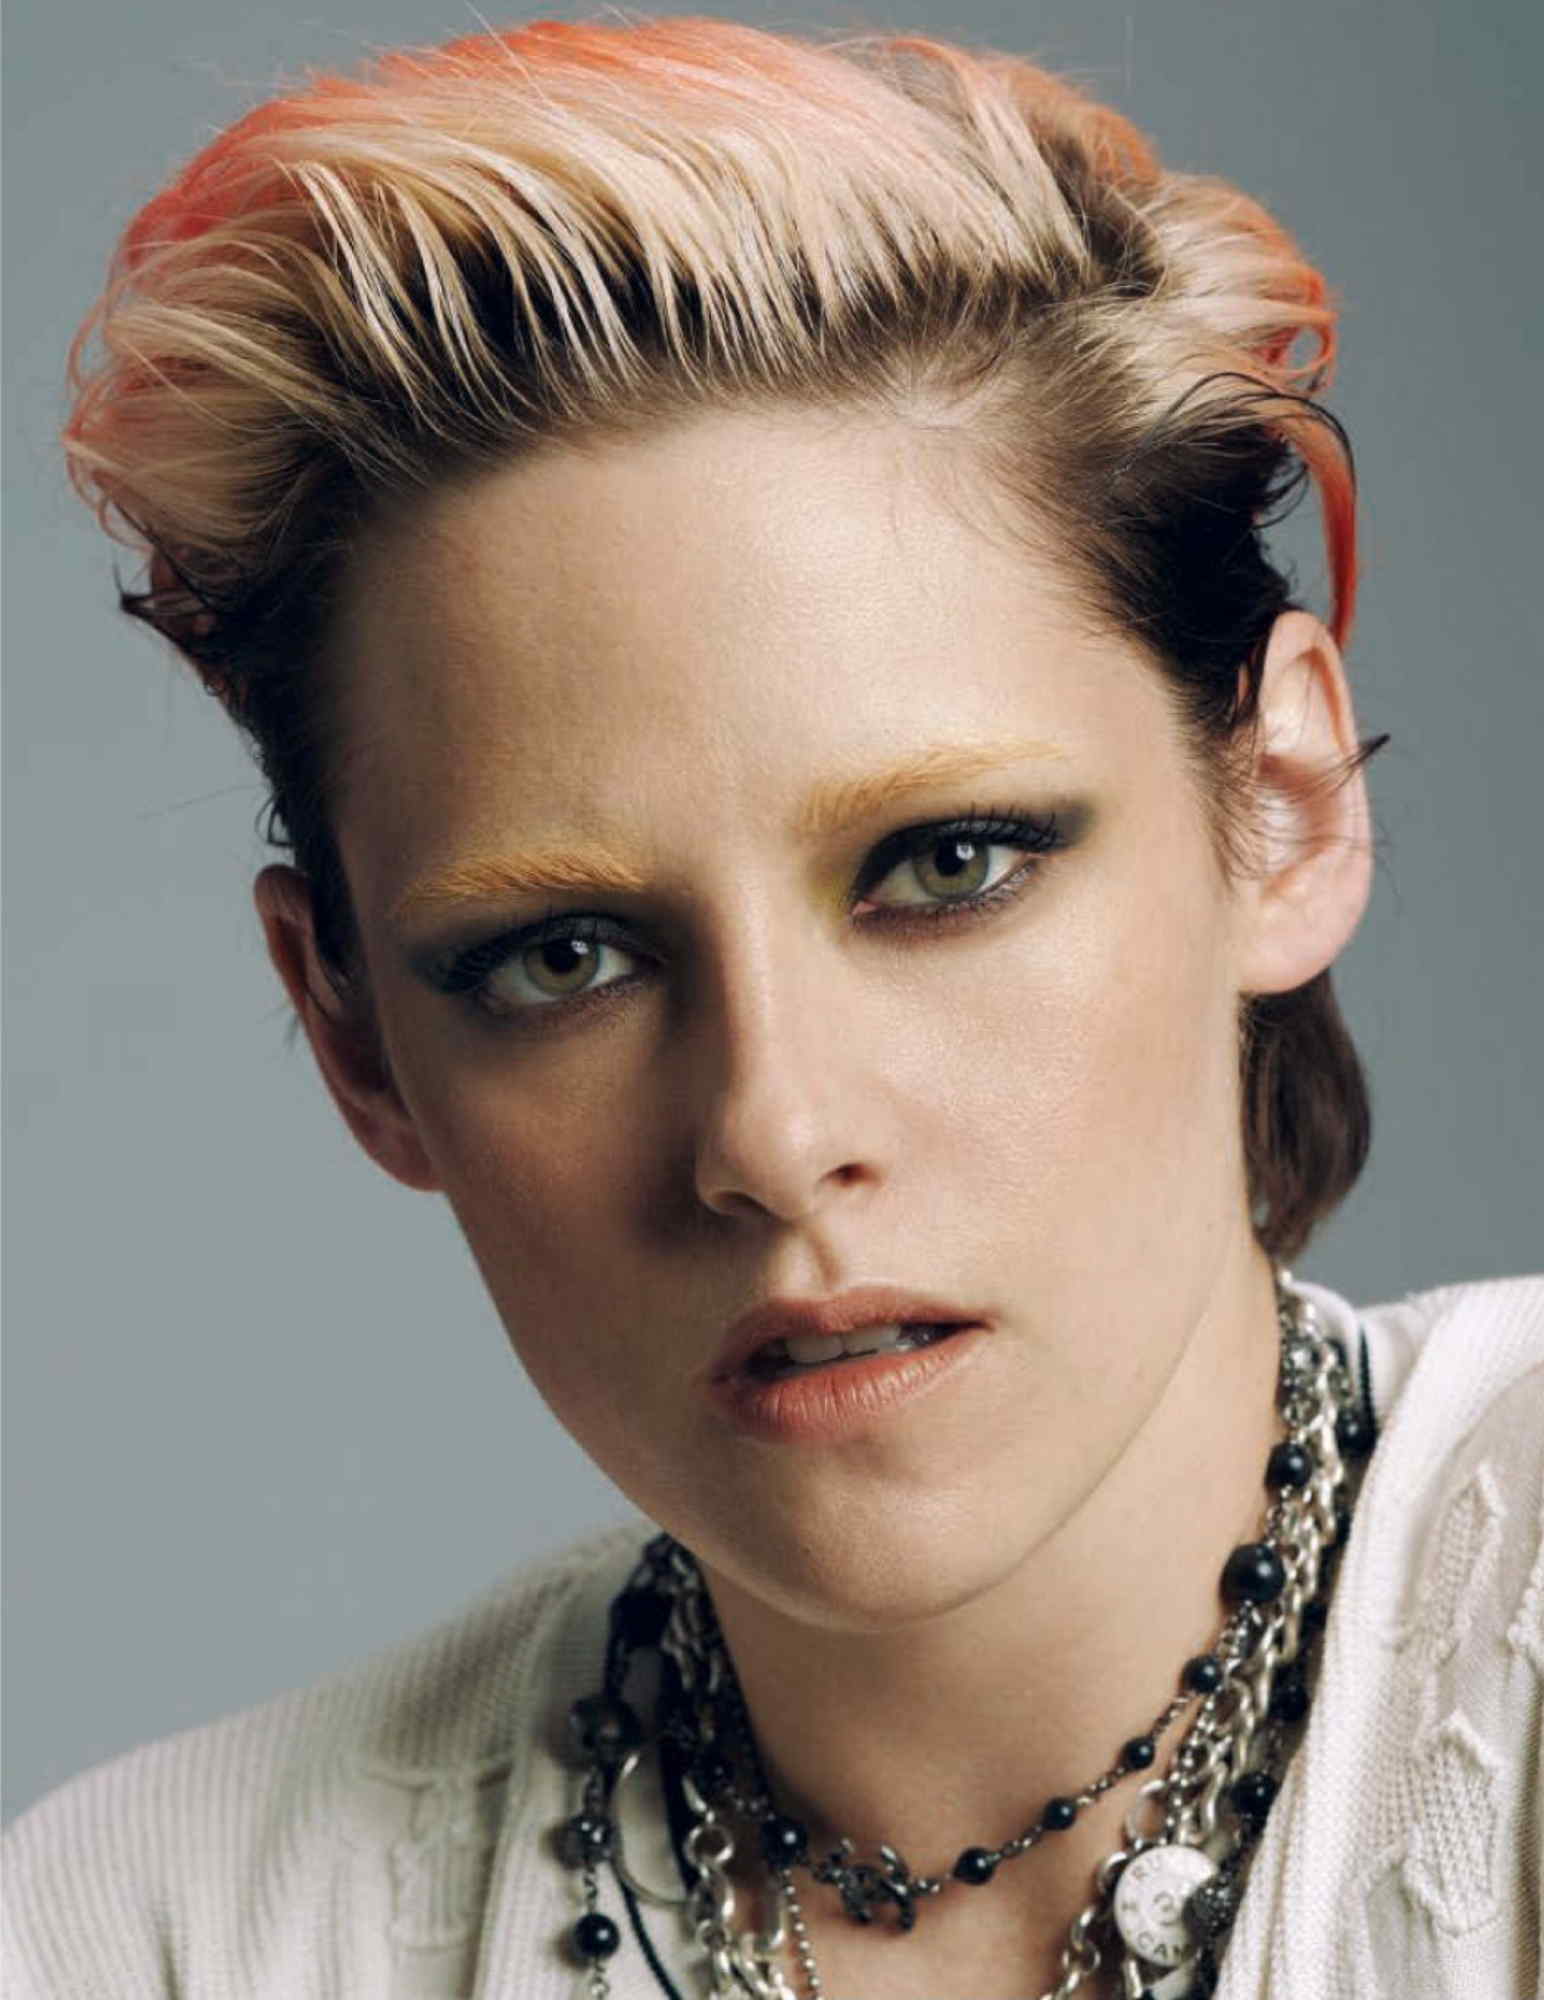 Kristen Stewart featured in the July 2019 issue of Vogue Germany